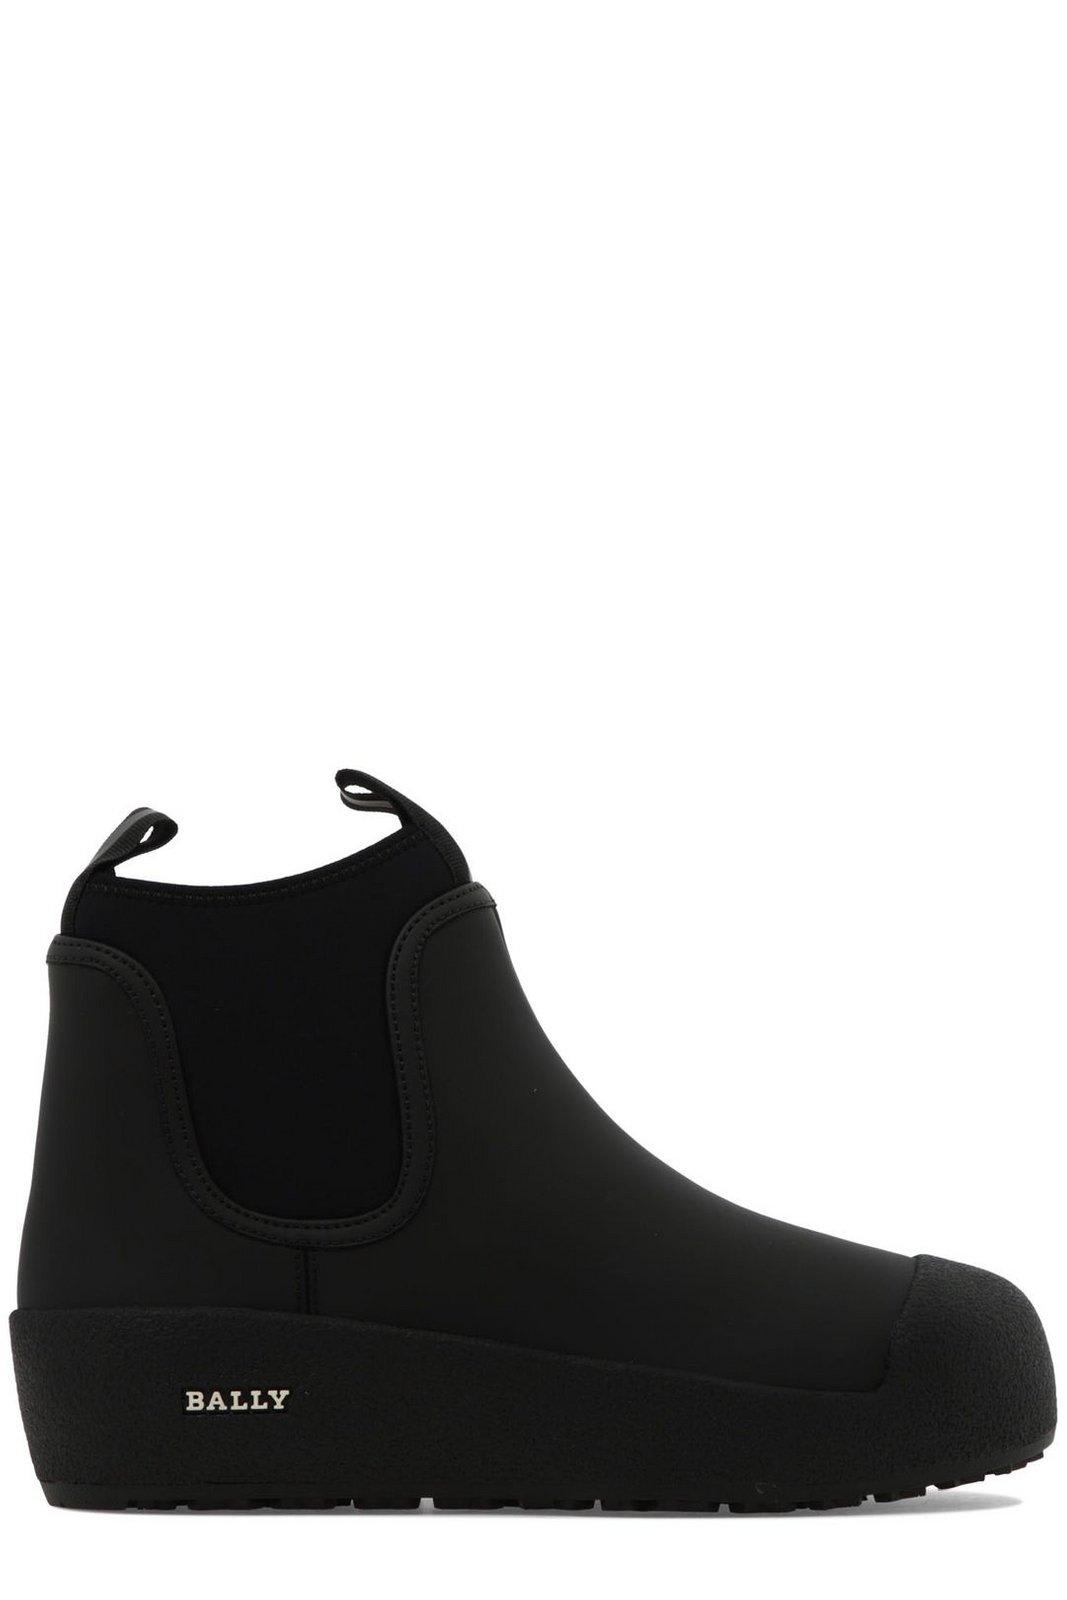 Bally Gadey Panelled Ankle Boots